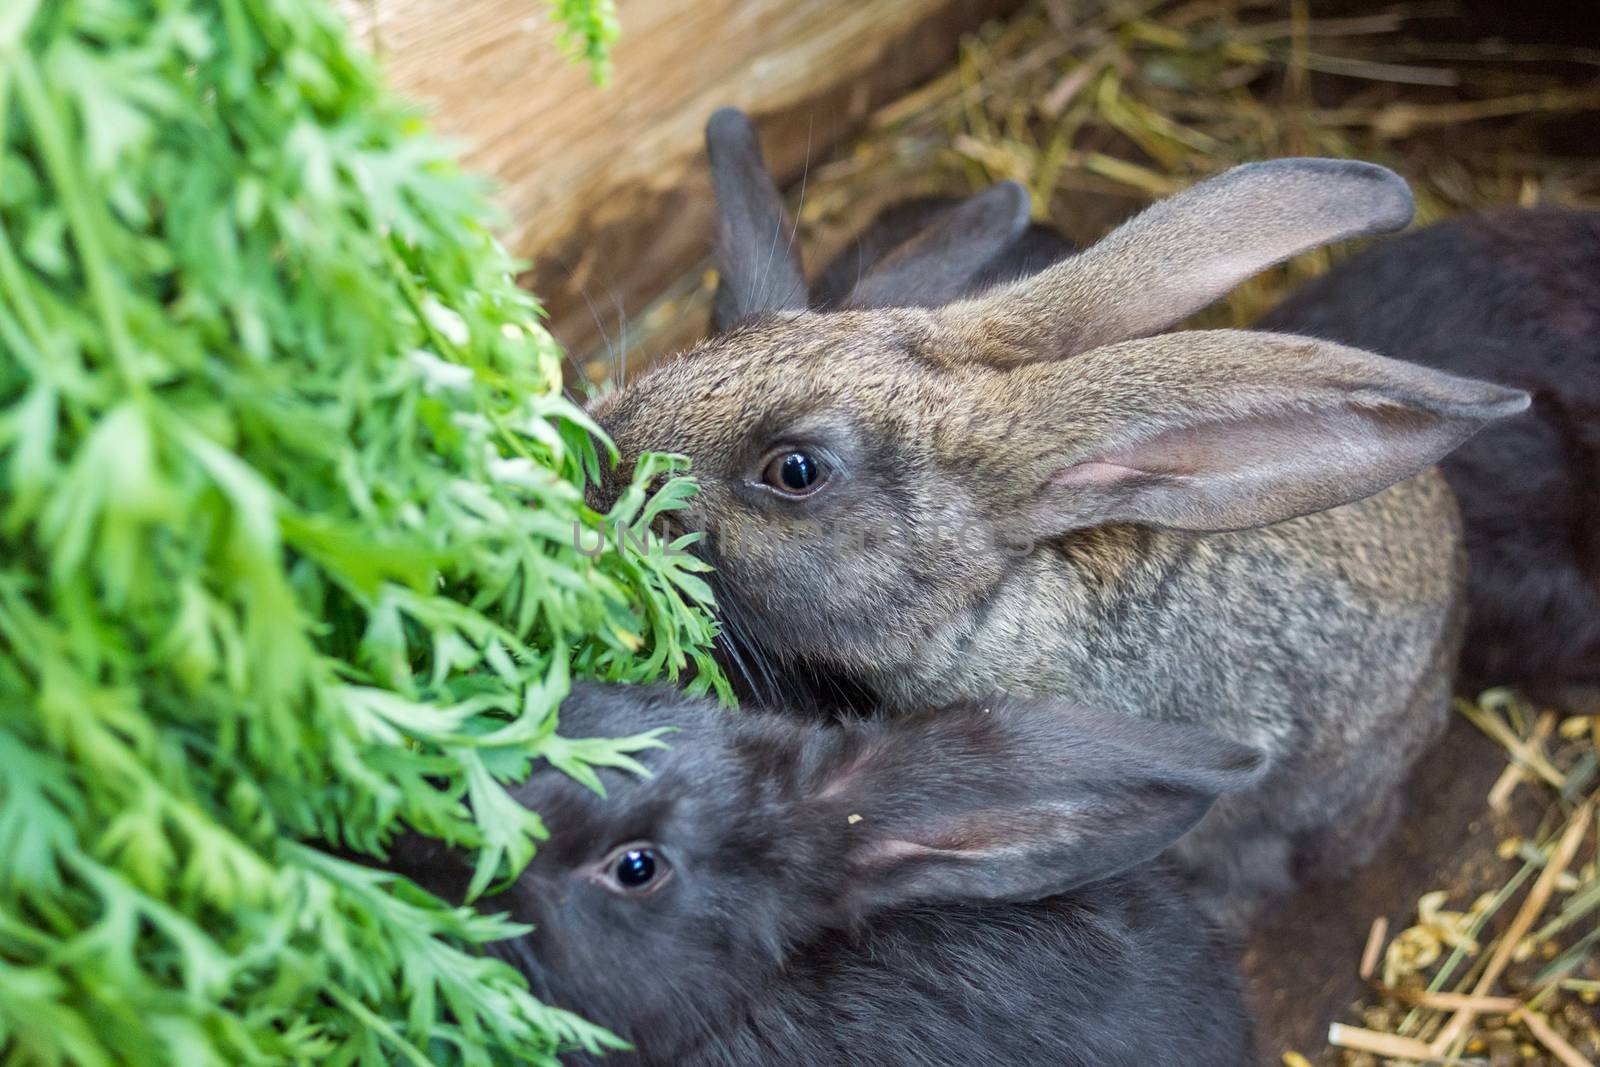 The picture shows the black and gray rabbit